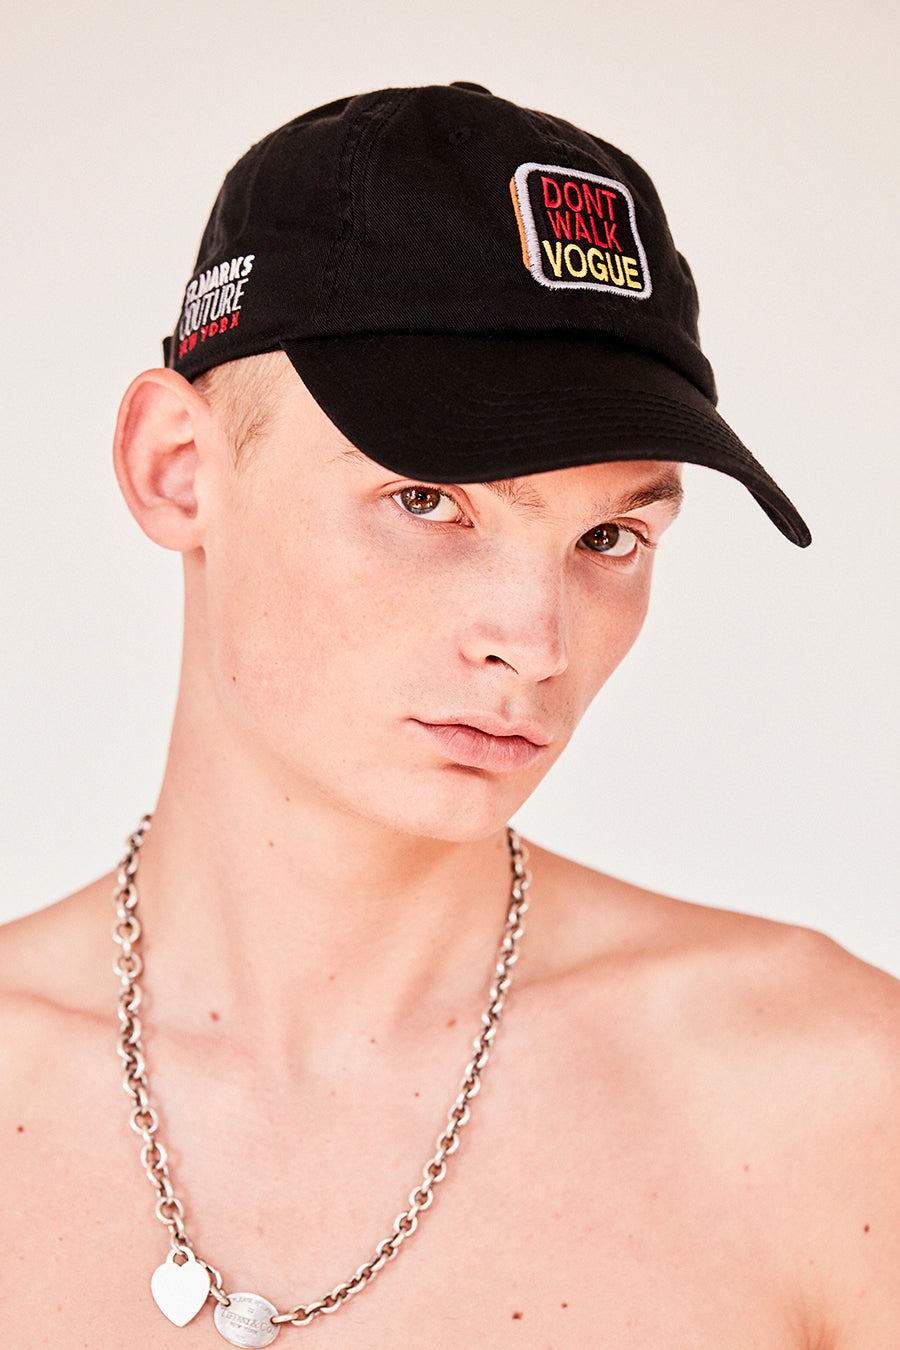 Brand New. New York Label: Stmarksnewyork.com. This Pride Month 2020 - Shop The Dont Walk Vogue baseball cap featuring embroidery inspired by old school Walk/Dont Walk crosswalk signs. Embroidered in New York with love